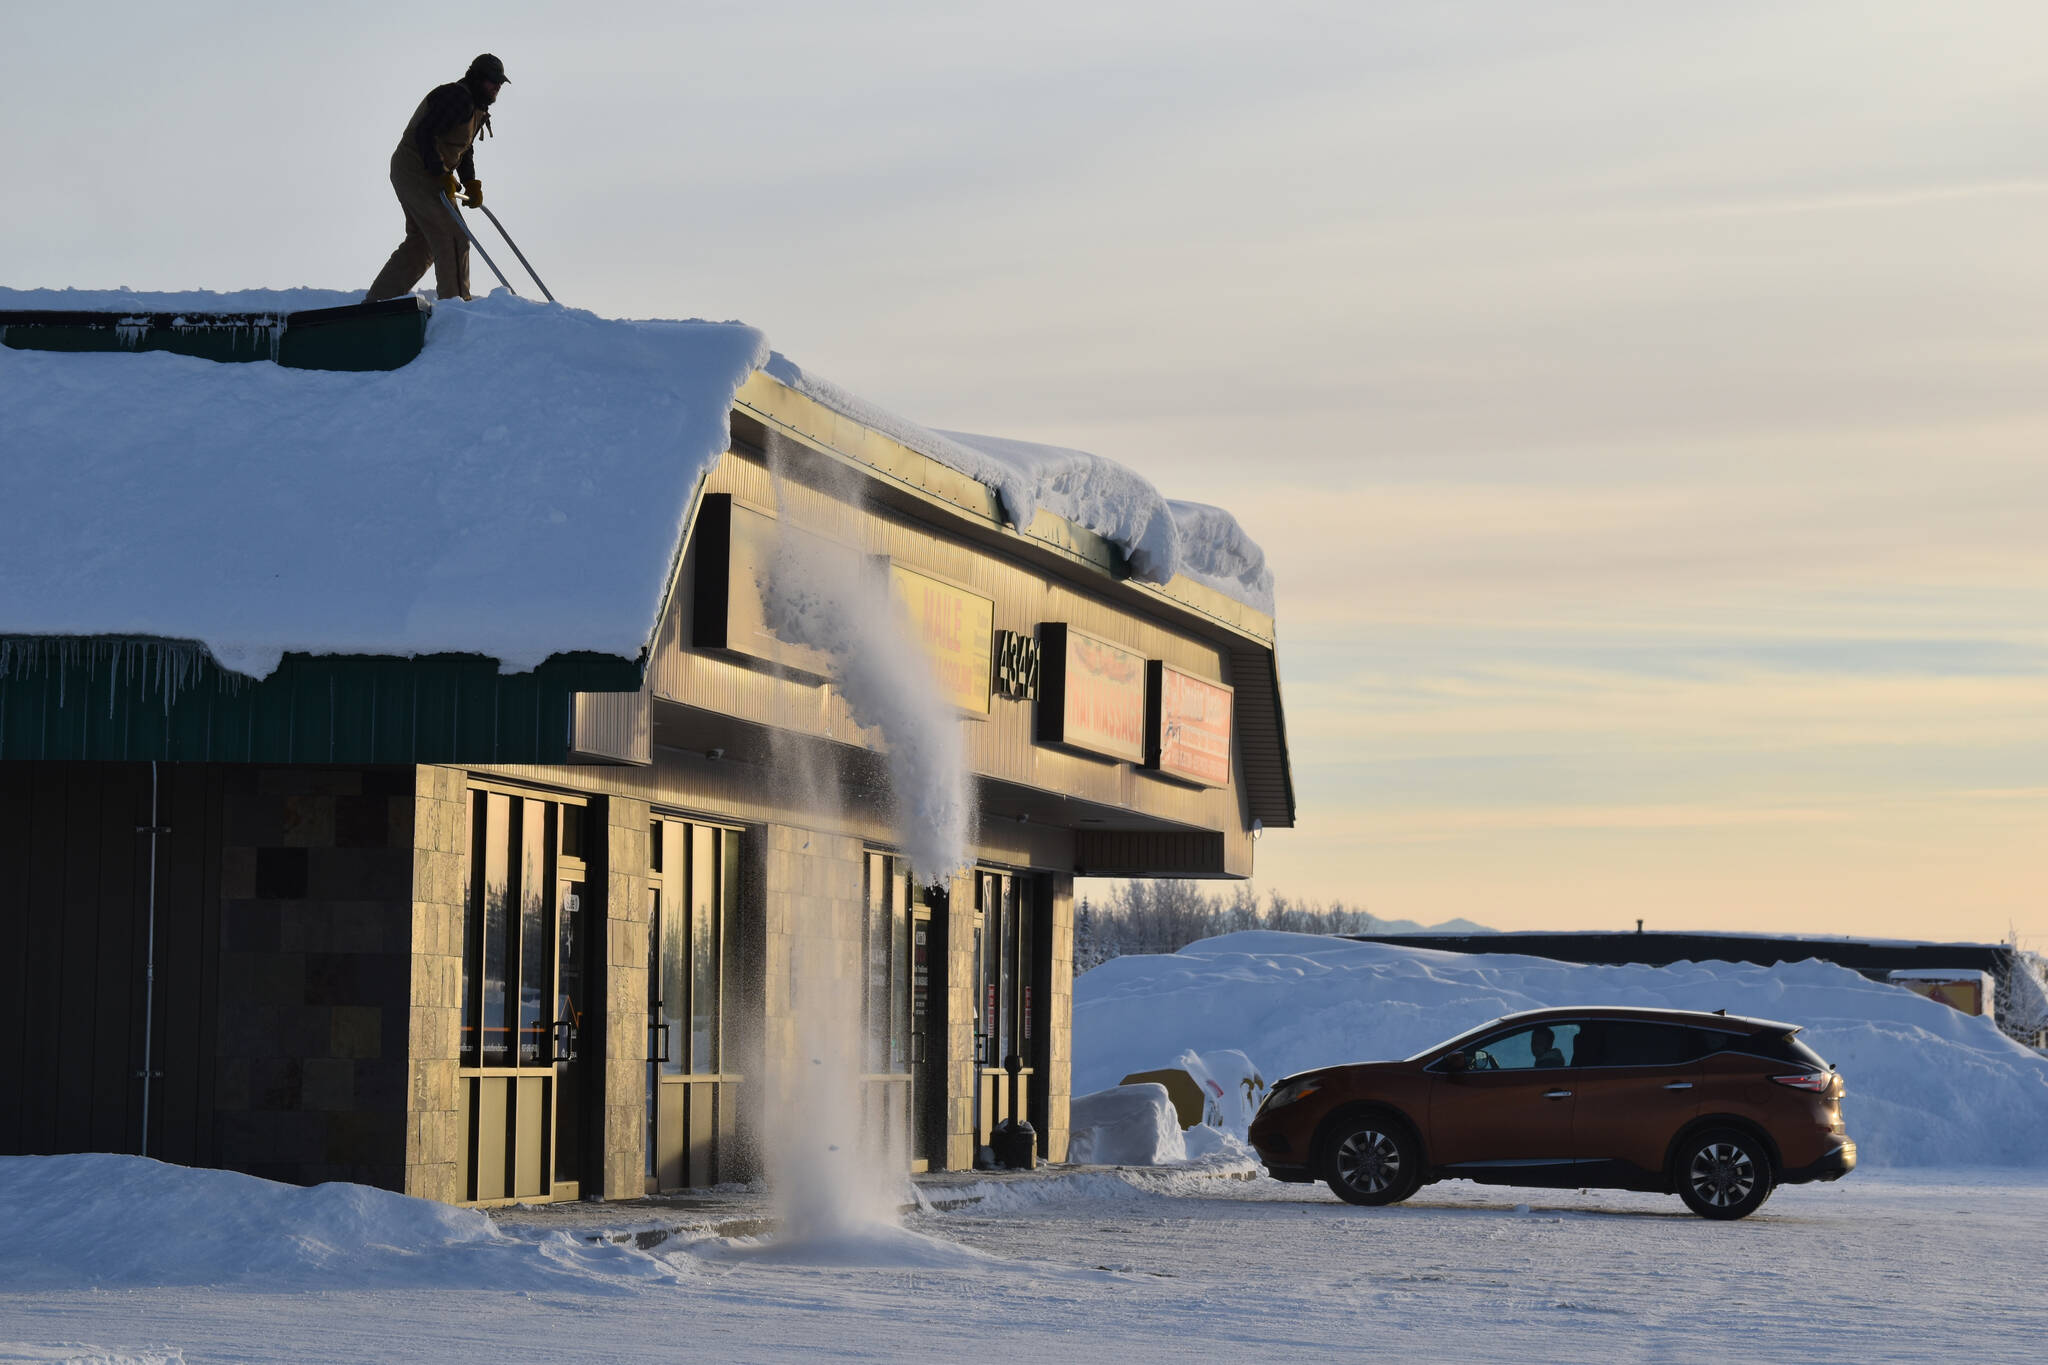 Snow is cleared from a roof near the Copper Center Soldotna, Alaska, on Friday, Dec. 16, 2022. Several nearby businesses were closed after a roof collapse. (Jake Dye/Peninsula Clarion)